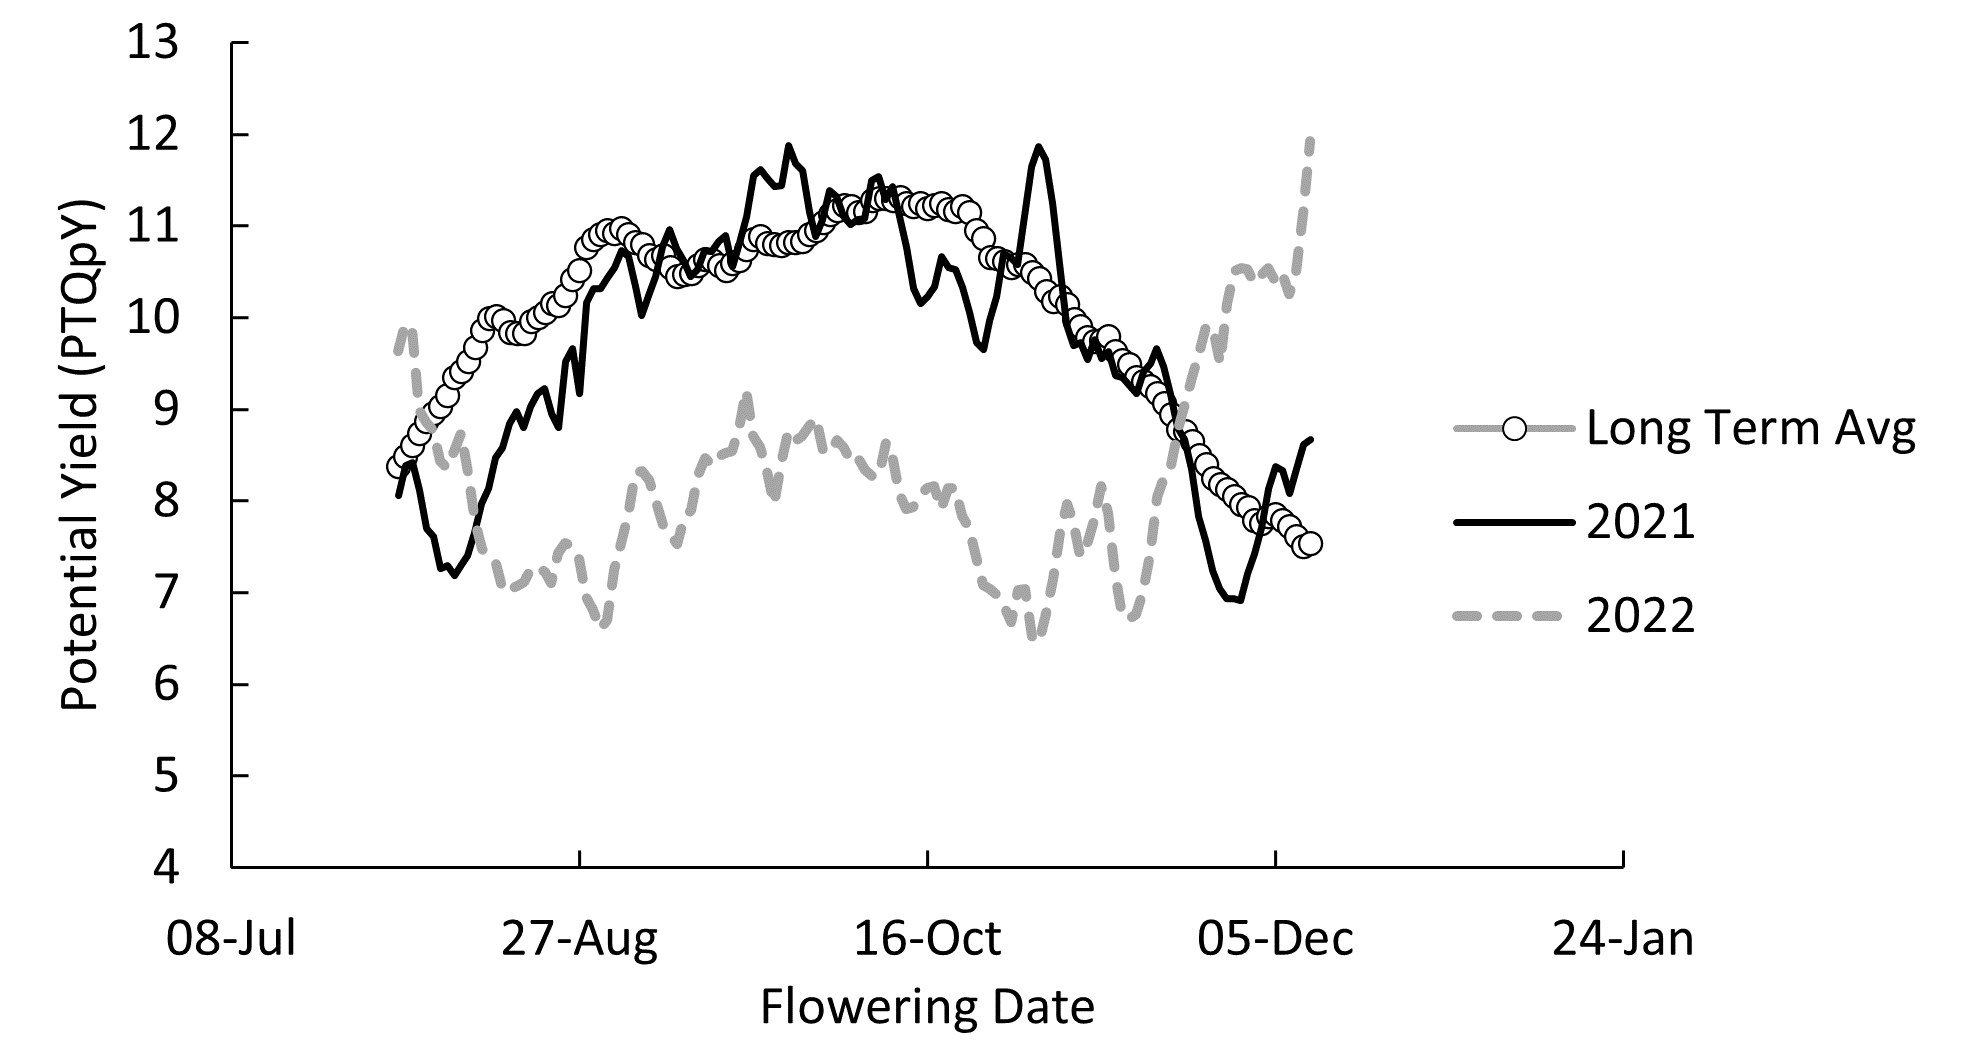 Figure 1 is a line graph of long term (last 20 years based on Cootamundra BOM data) yield potential based on the photothermal quotient (PTQ) and its relationship with flowering date at Wallendbeen, compared to 2021 and 2022.